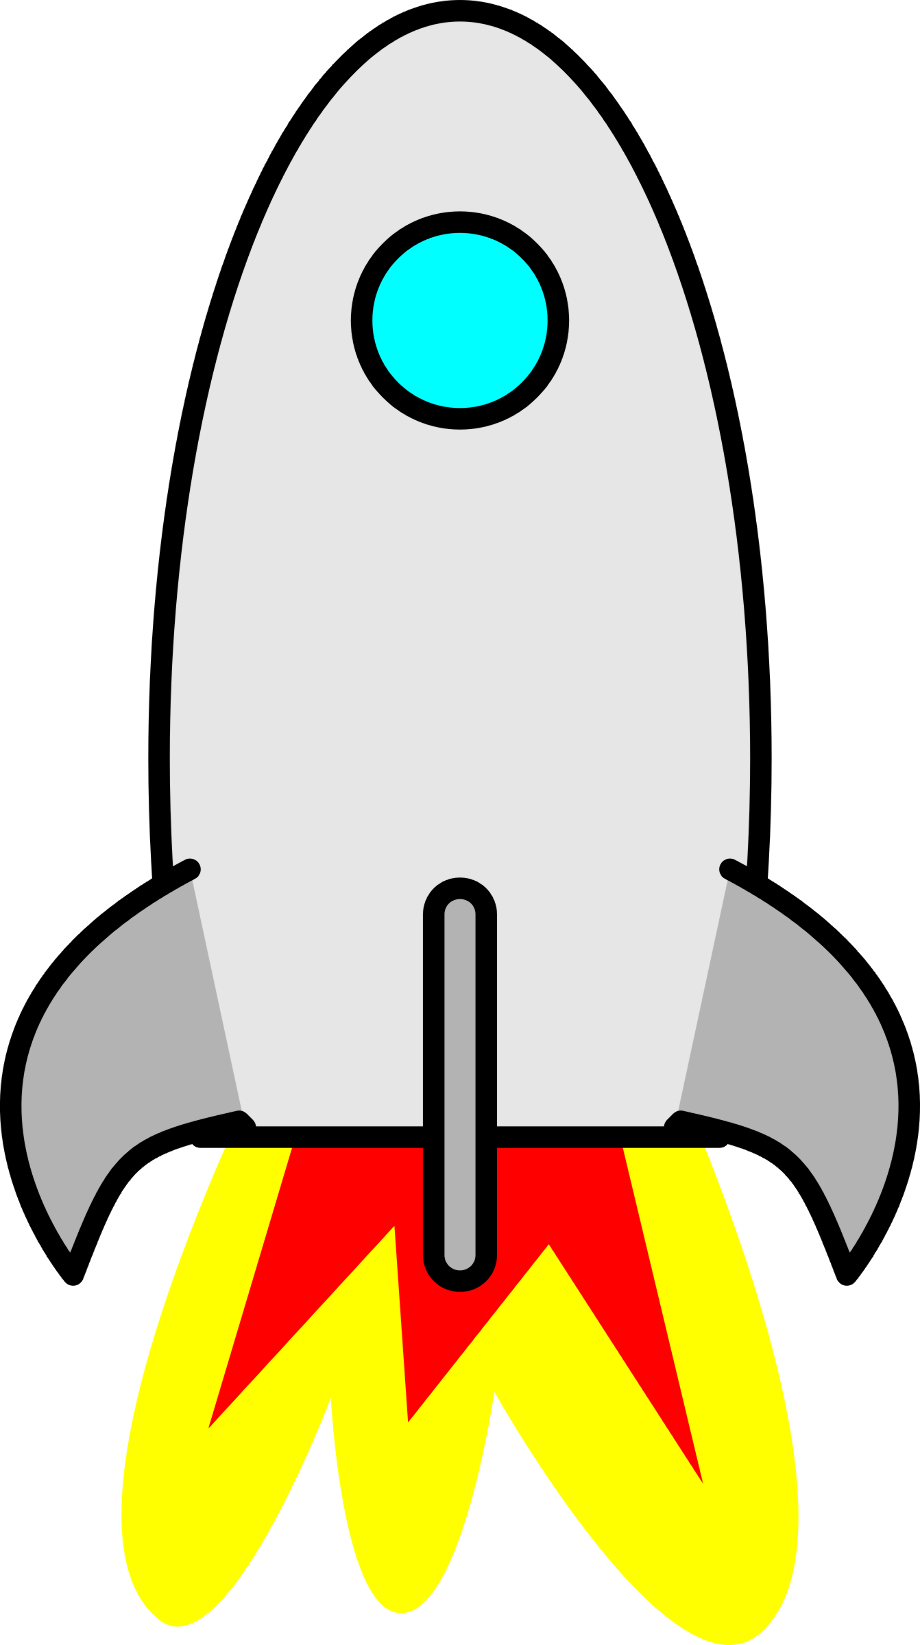 Download High Quality spaceship clipart rocket ship